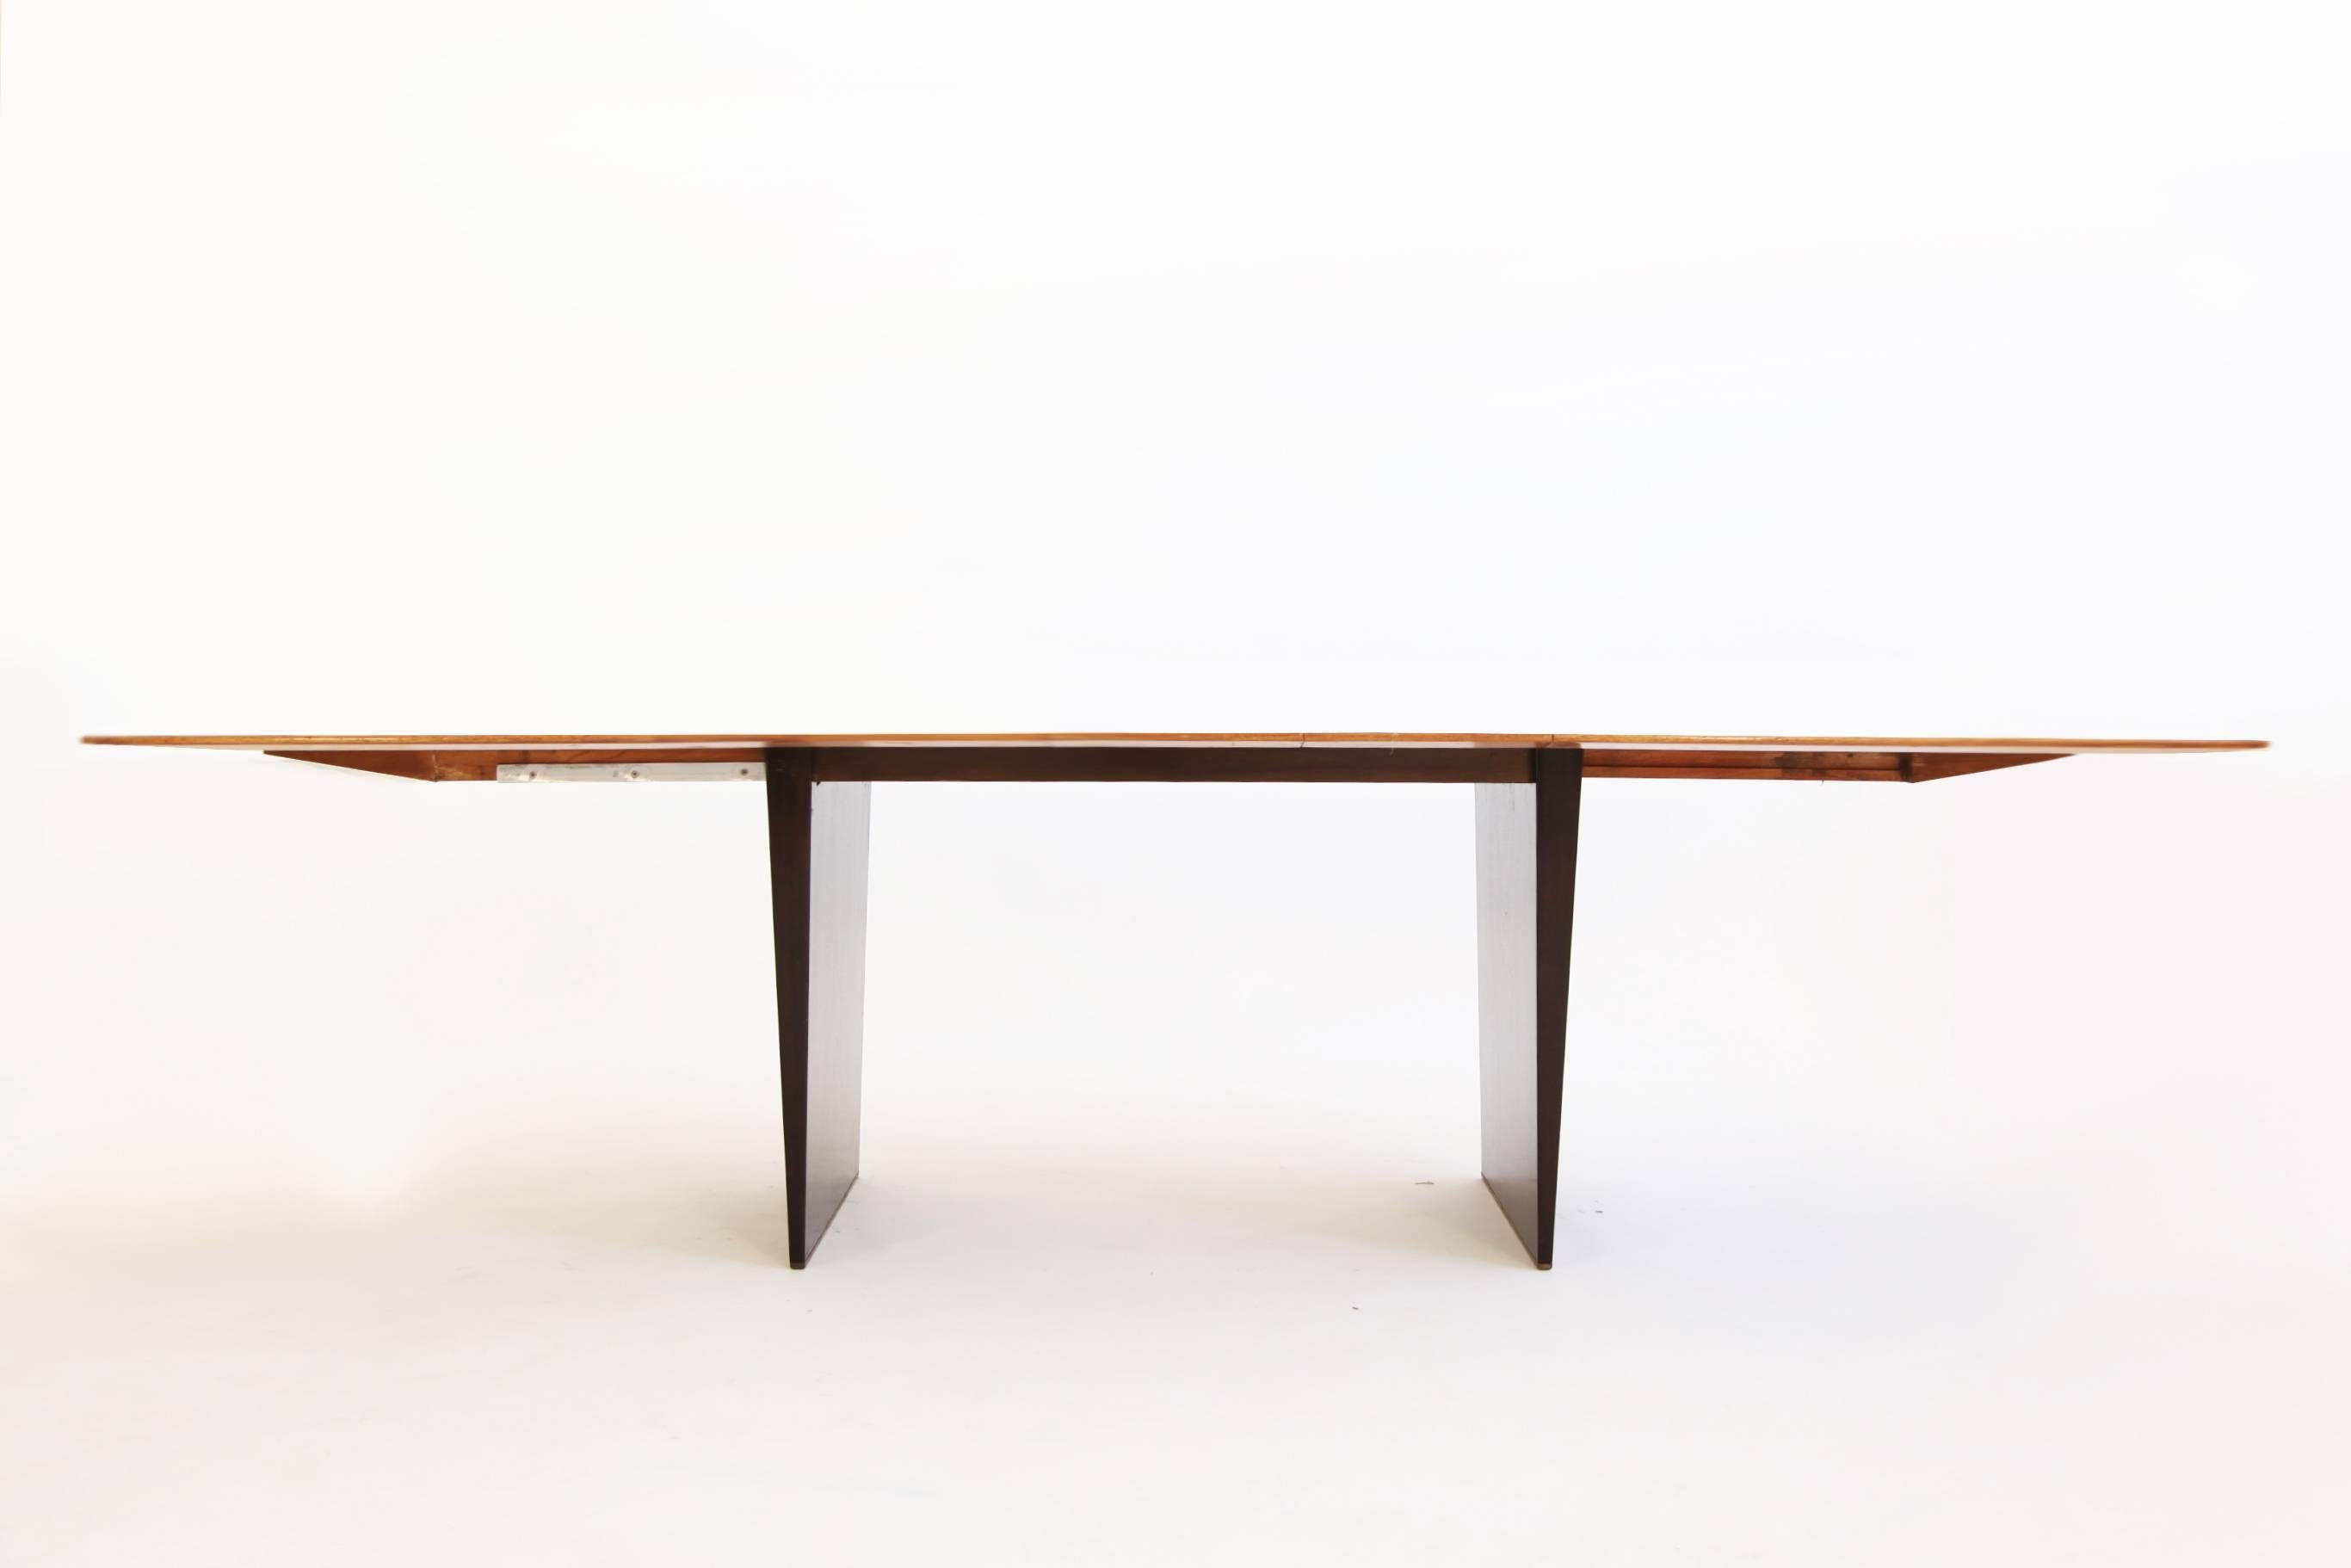 Wormley for Dunbar, boat shaped dining table, model 5460; tawi-wood top with mahogany base with solid brass glides.
Graining on top runs with length of the table, three leaves graining runs with depth showing intended contrast.
Three 12-inch